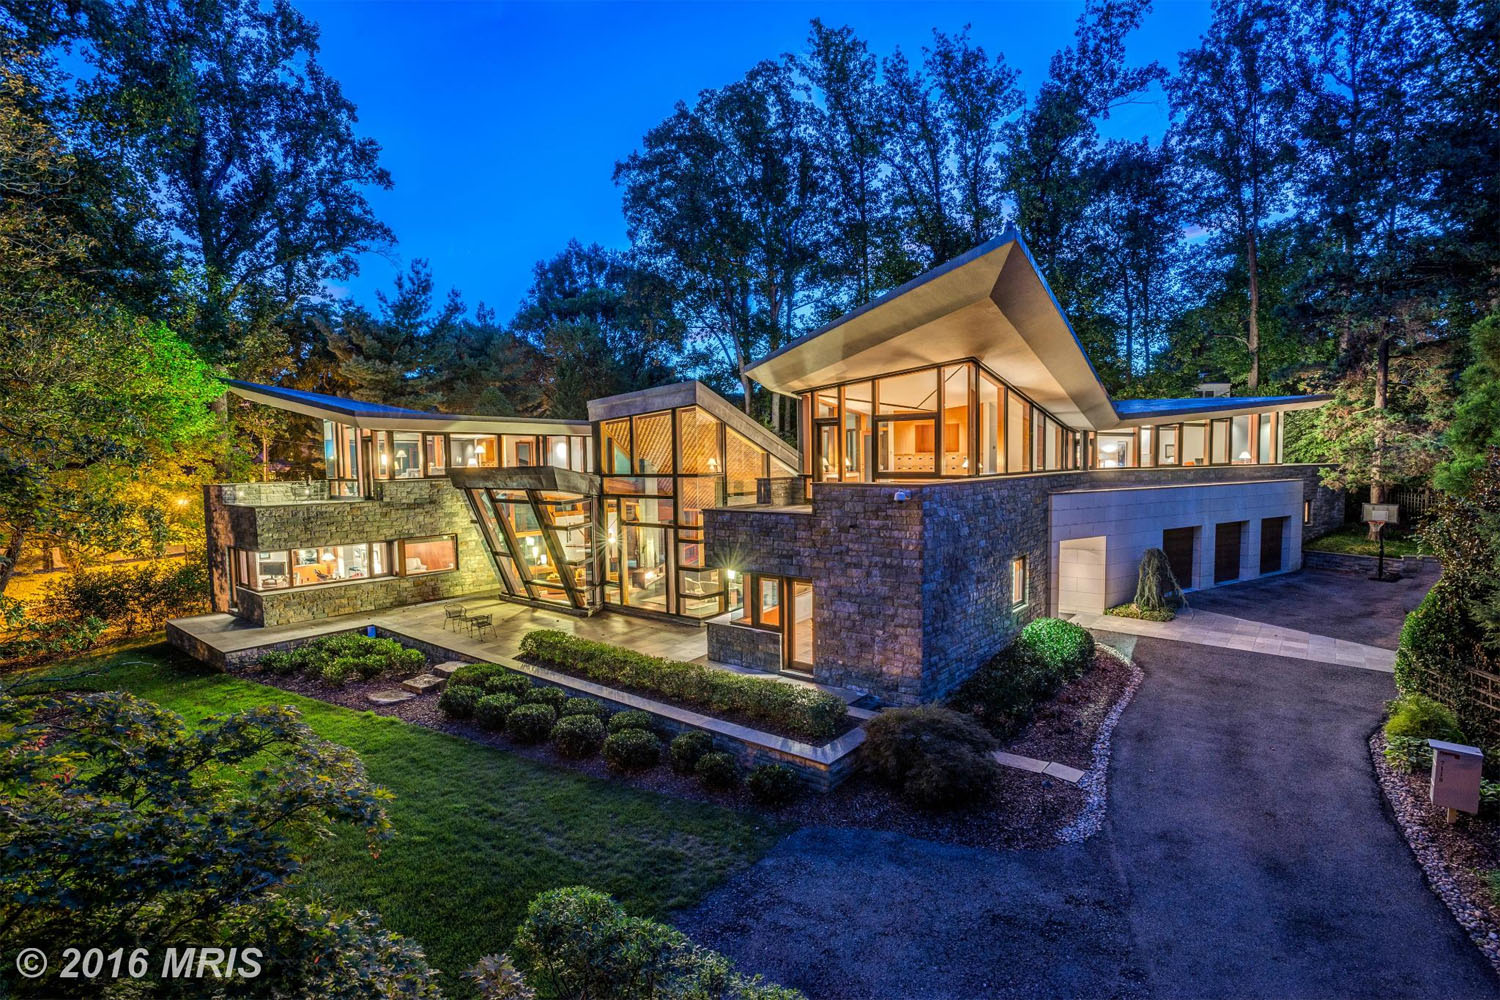 $6,500,000

7118 Glenbrook Road, Bethesda, Maryland

This contemporary home built in 2009 sold for $6.5 million last month. The Bethesda home has four bathrooms and eight bedrooms. (MRIS)